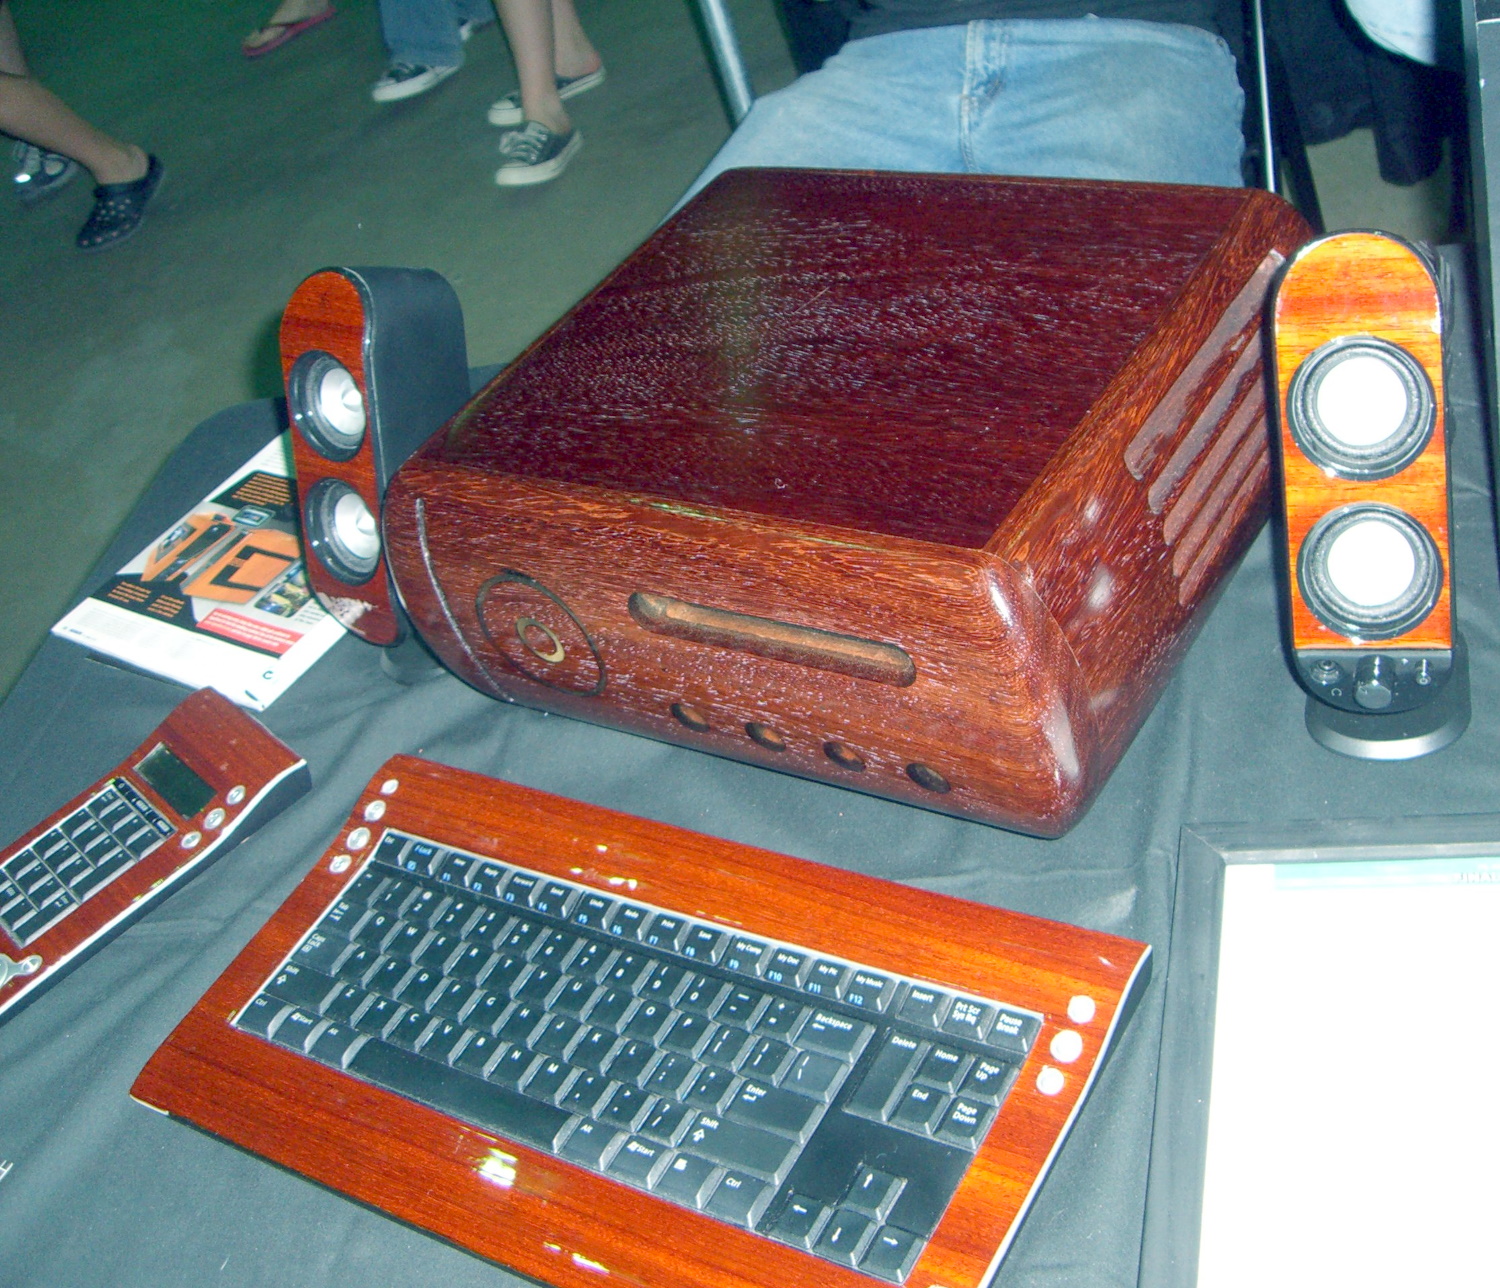 Wooden computer case, speakers and keyboard